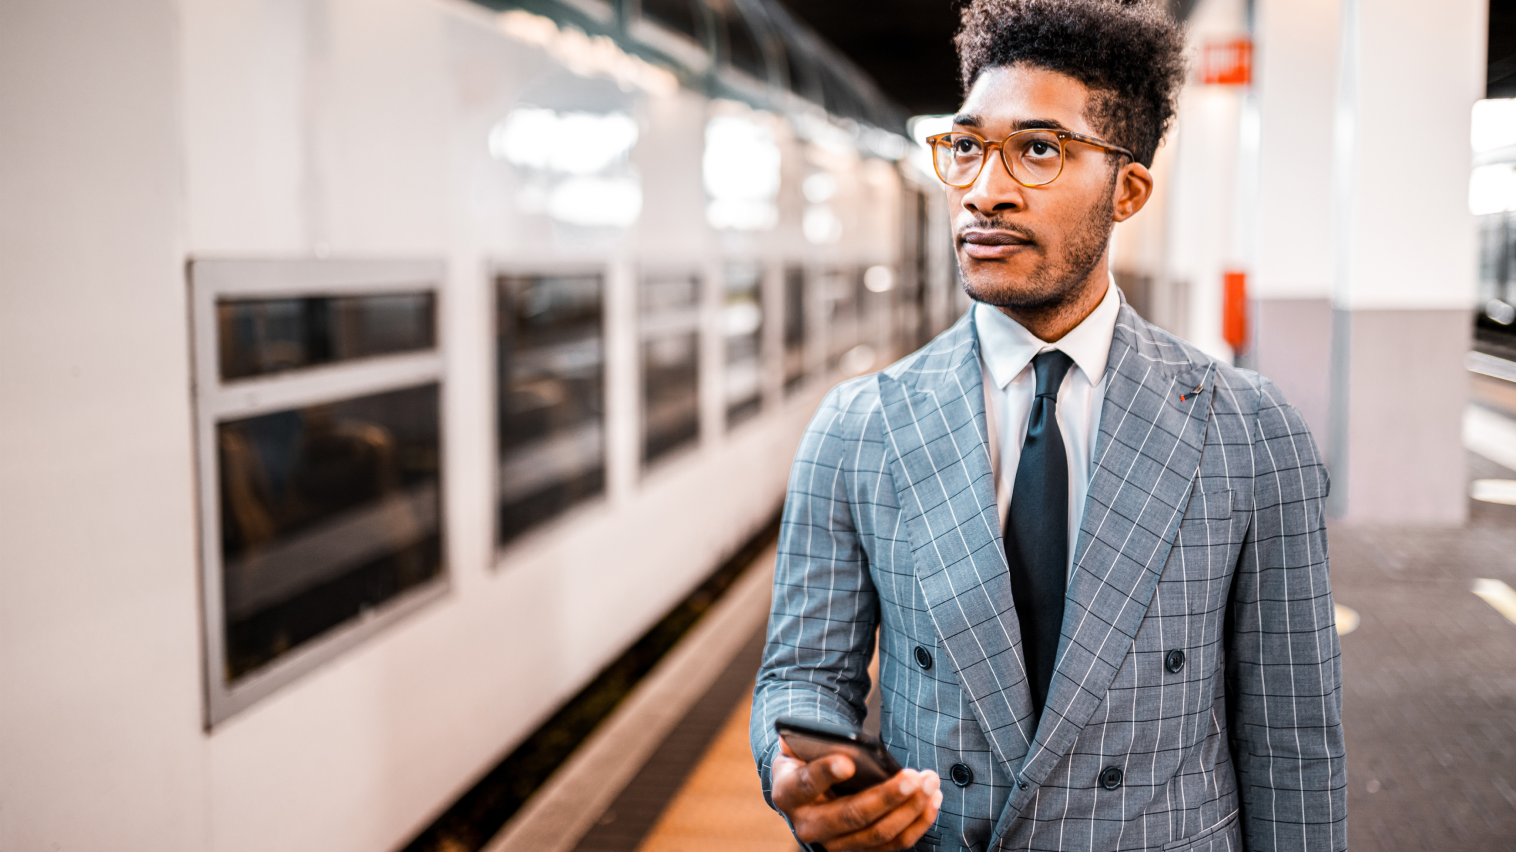 A man wearing red-rimmed glasses, suit and tie standing in a subway holding a smartphone.